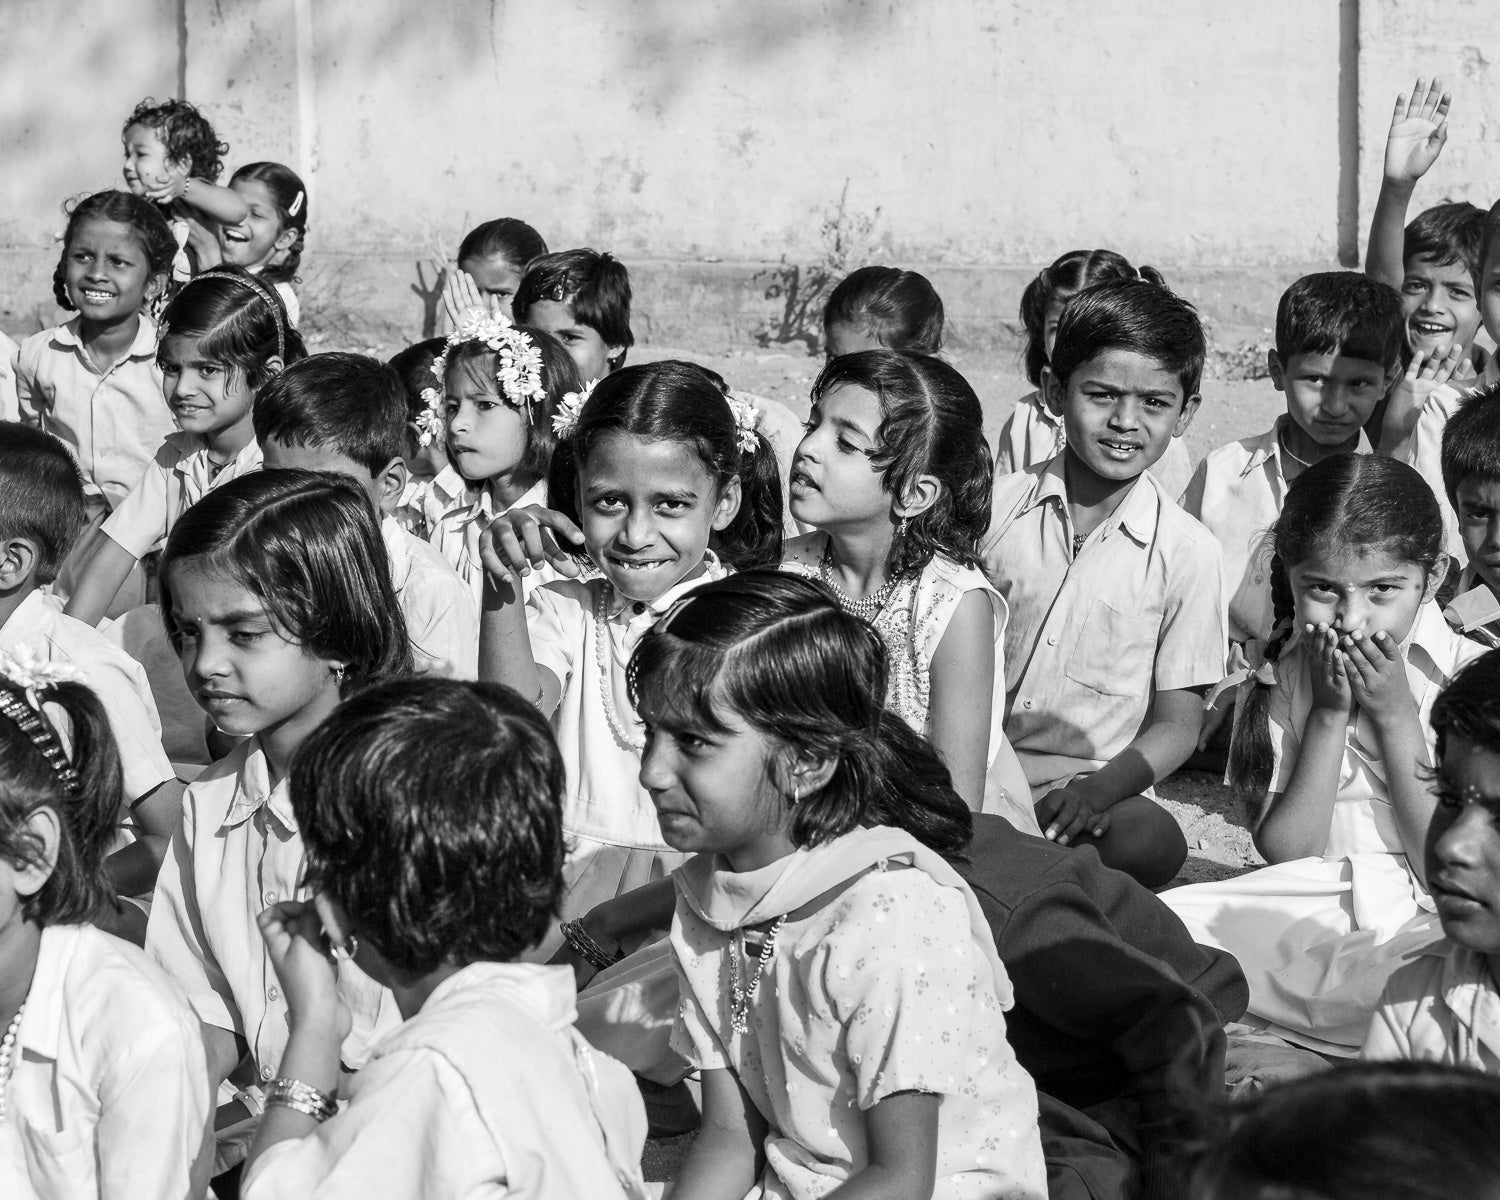 ic:I received consent from school administrators to photograph these children in a schoolyard in India